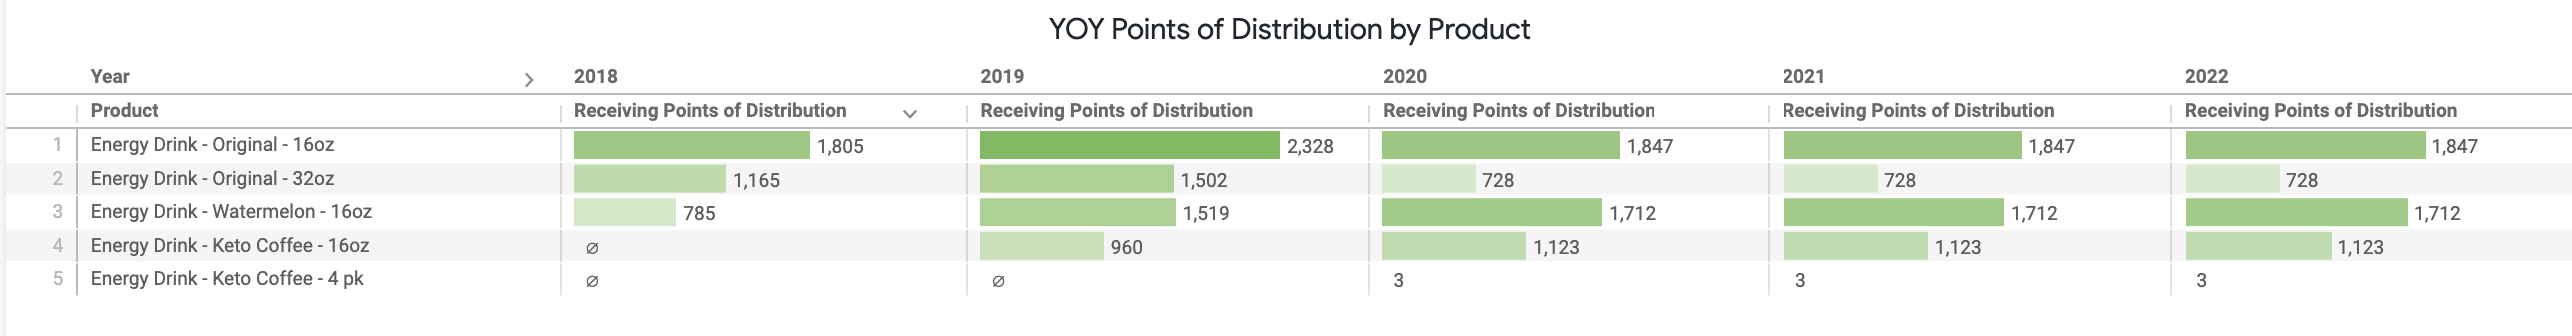 YOY_Points_of_Distribution_by_Product.png